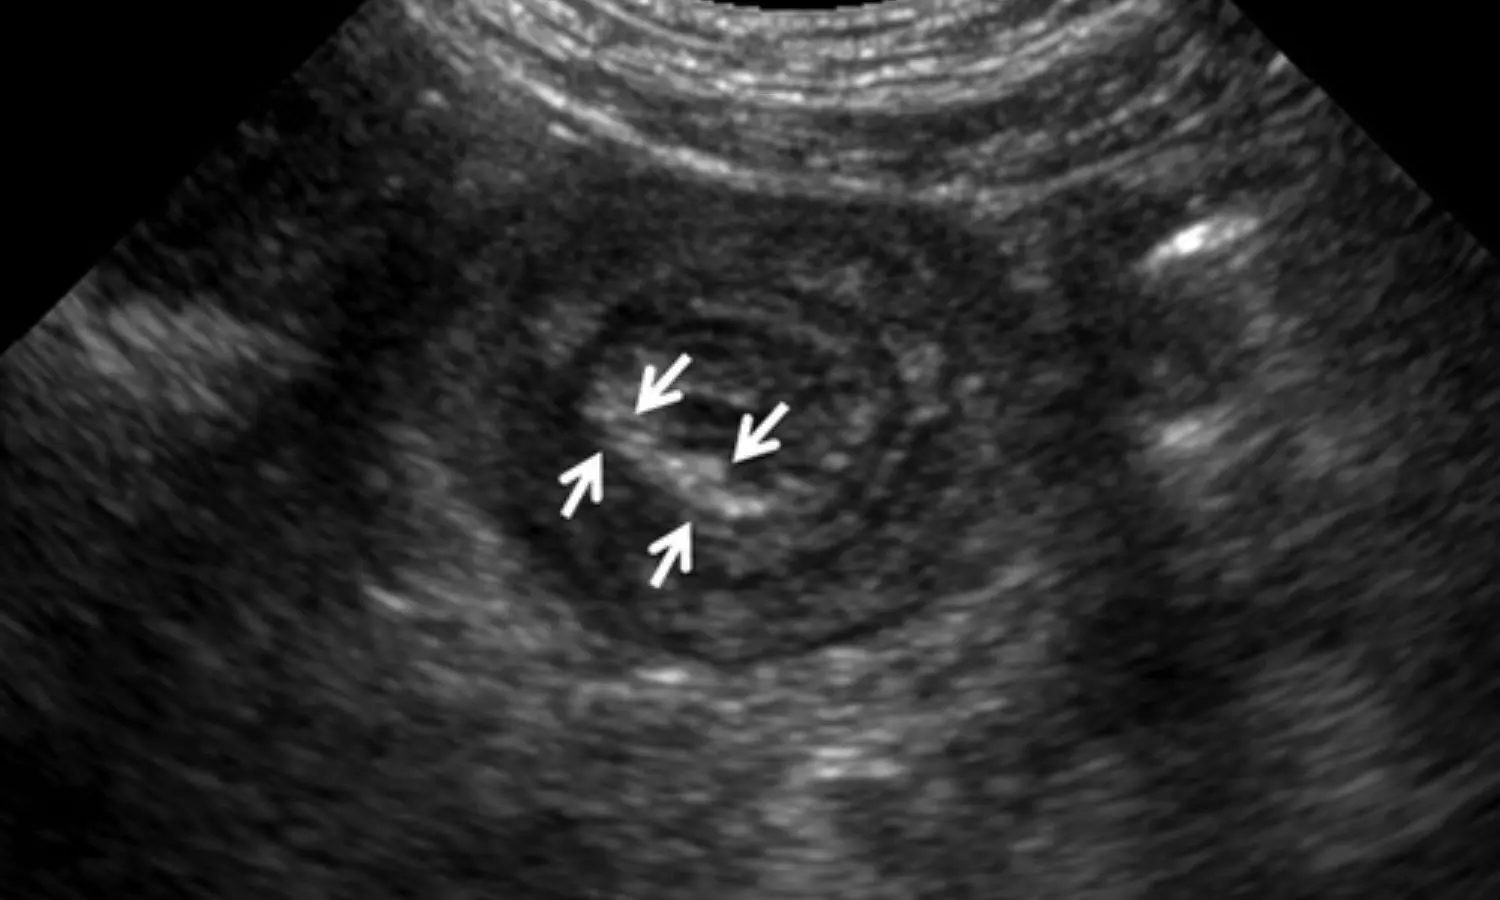 POCUS helpful for differentiating intussusception in pediatric patients: Study